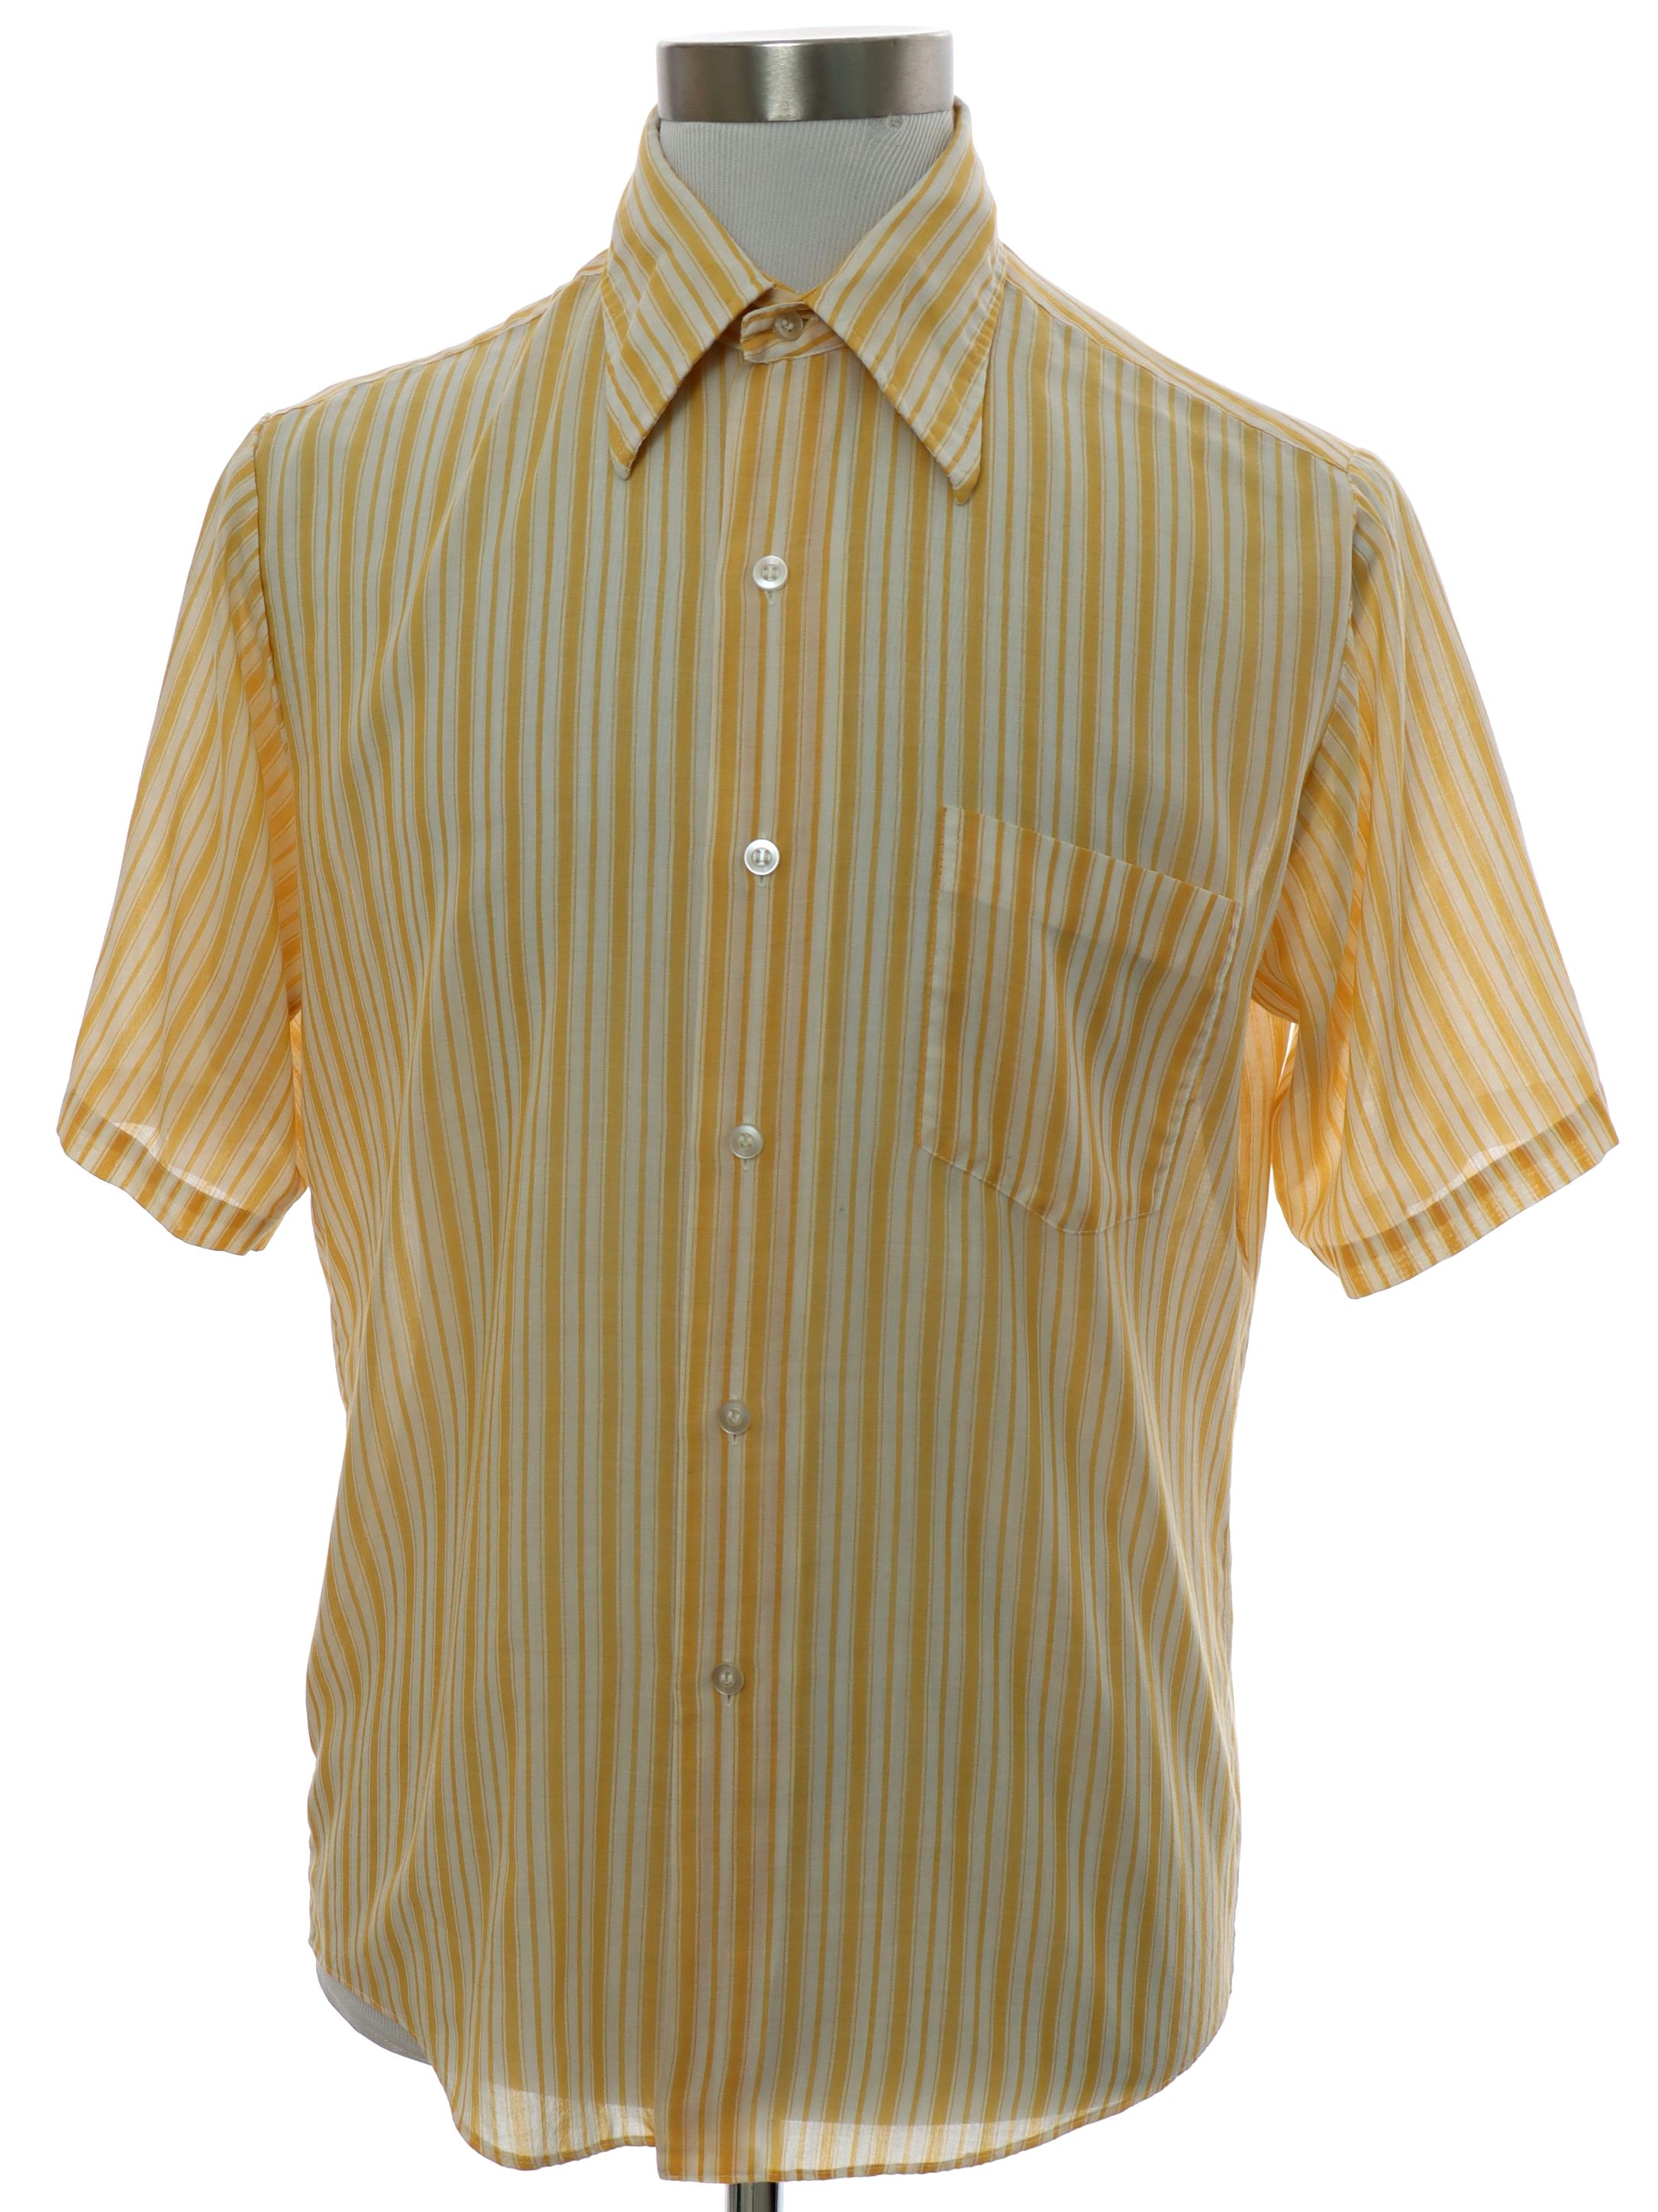 Vintage 60s Shirt: 60s -Towncraft- Mens yellow and cream striped ...